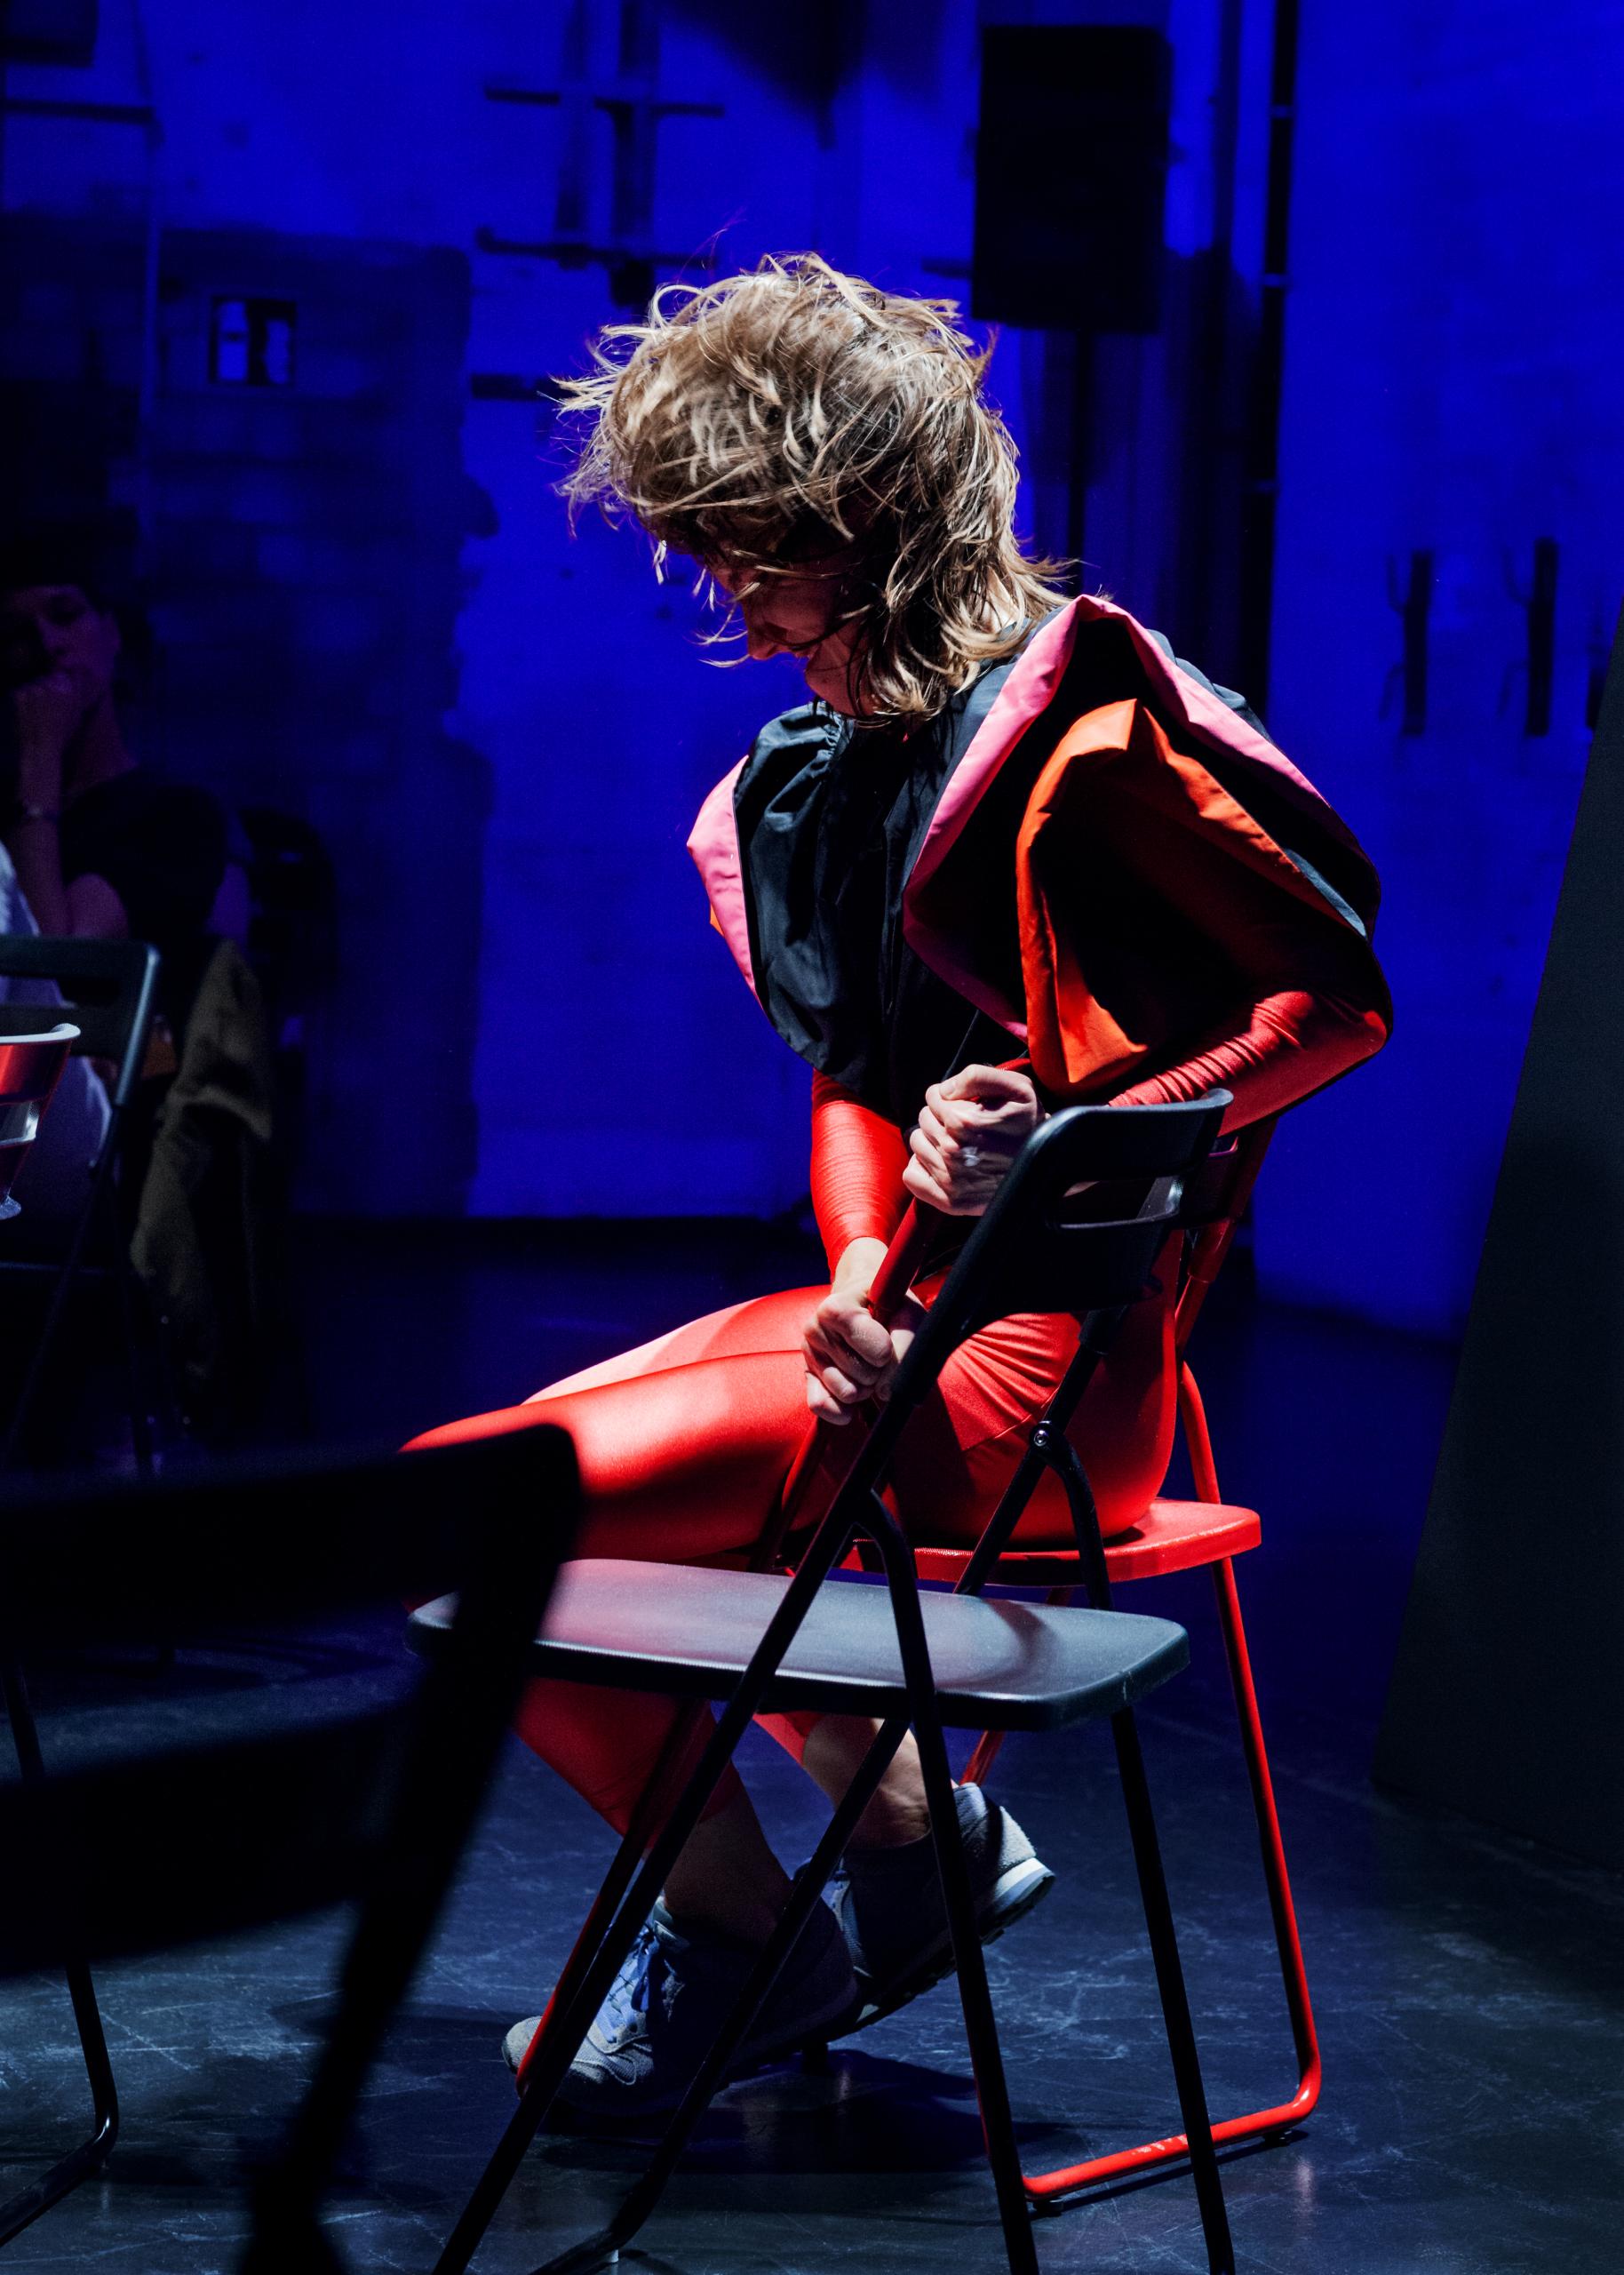 Blue lit stage, woman in red costume sits on folding chair